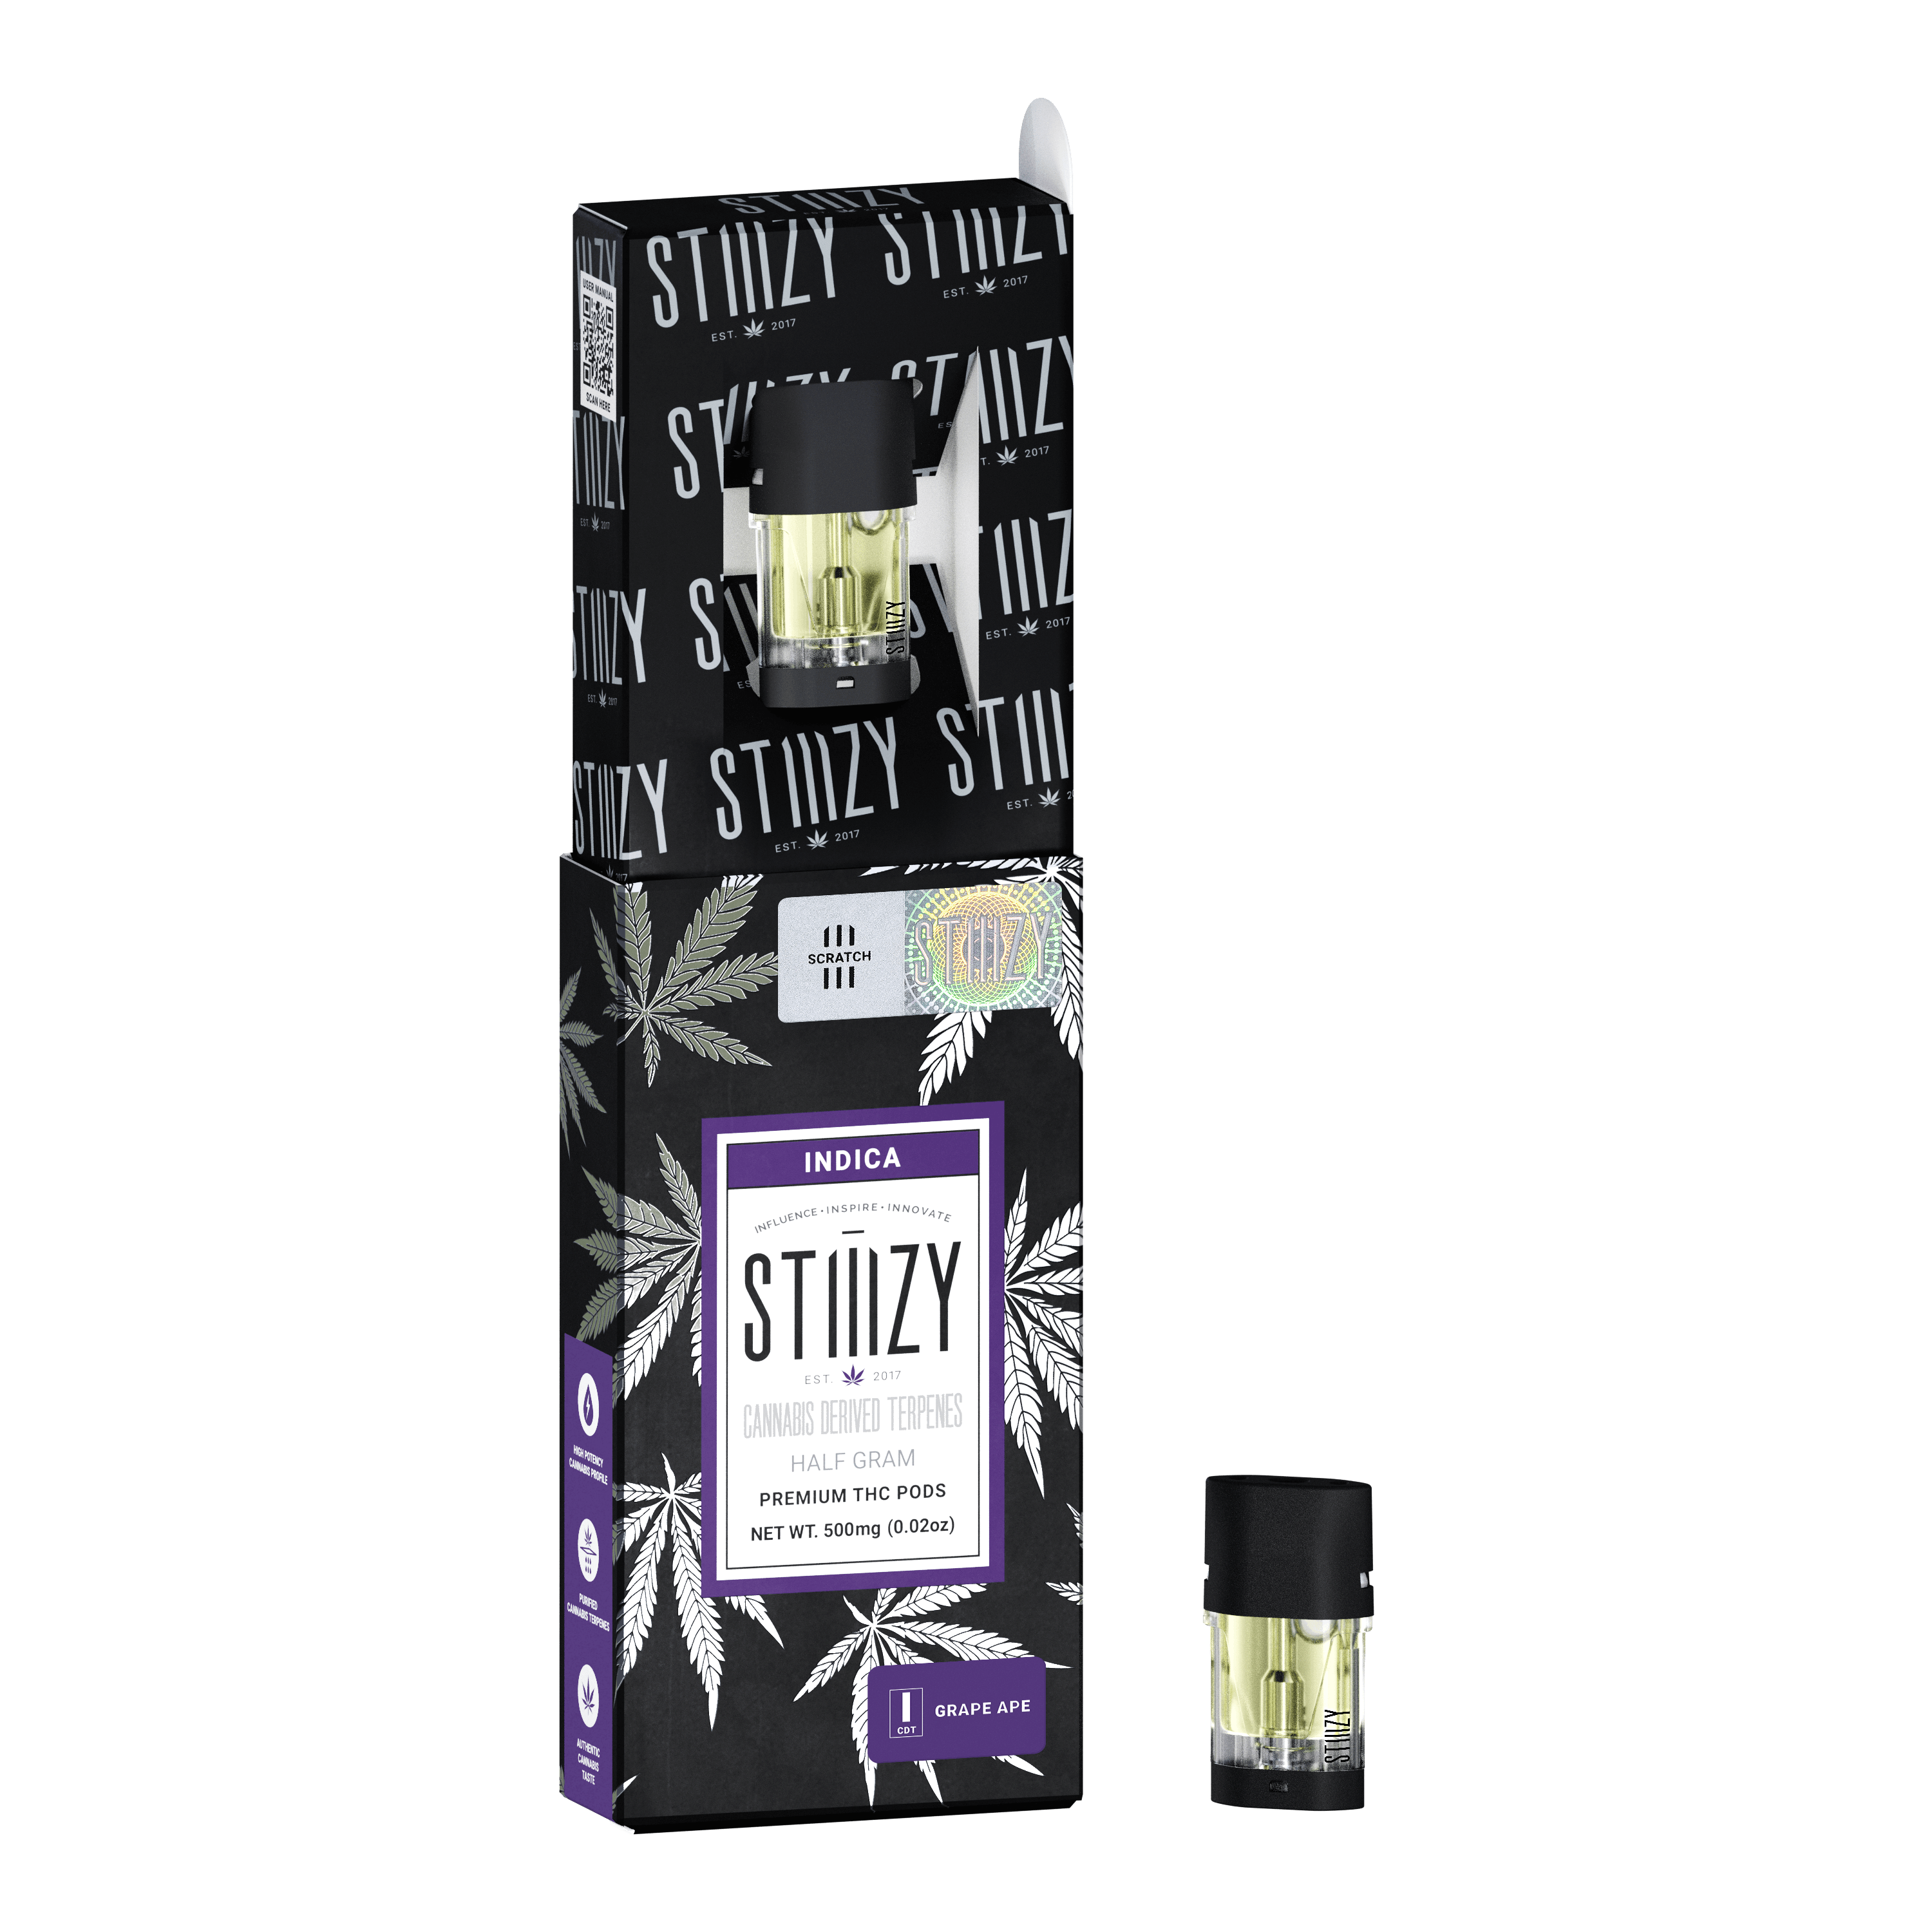 A black and purple box showcases cannabis-derived terpene pods with distillate extracted from weed of the Grape Ape strain.